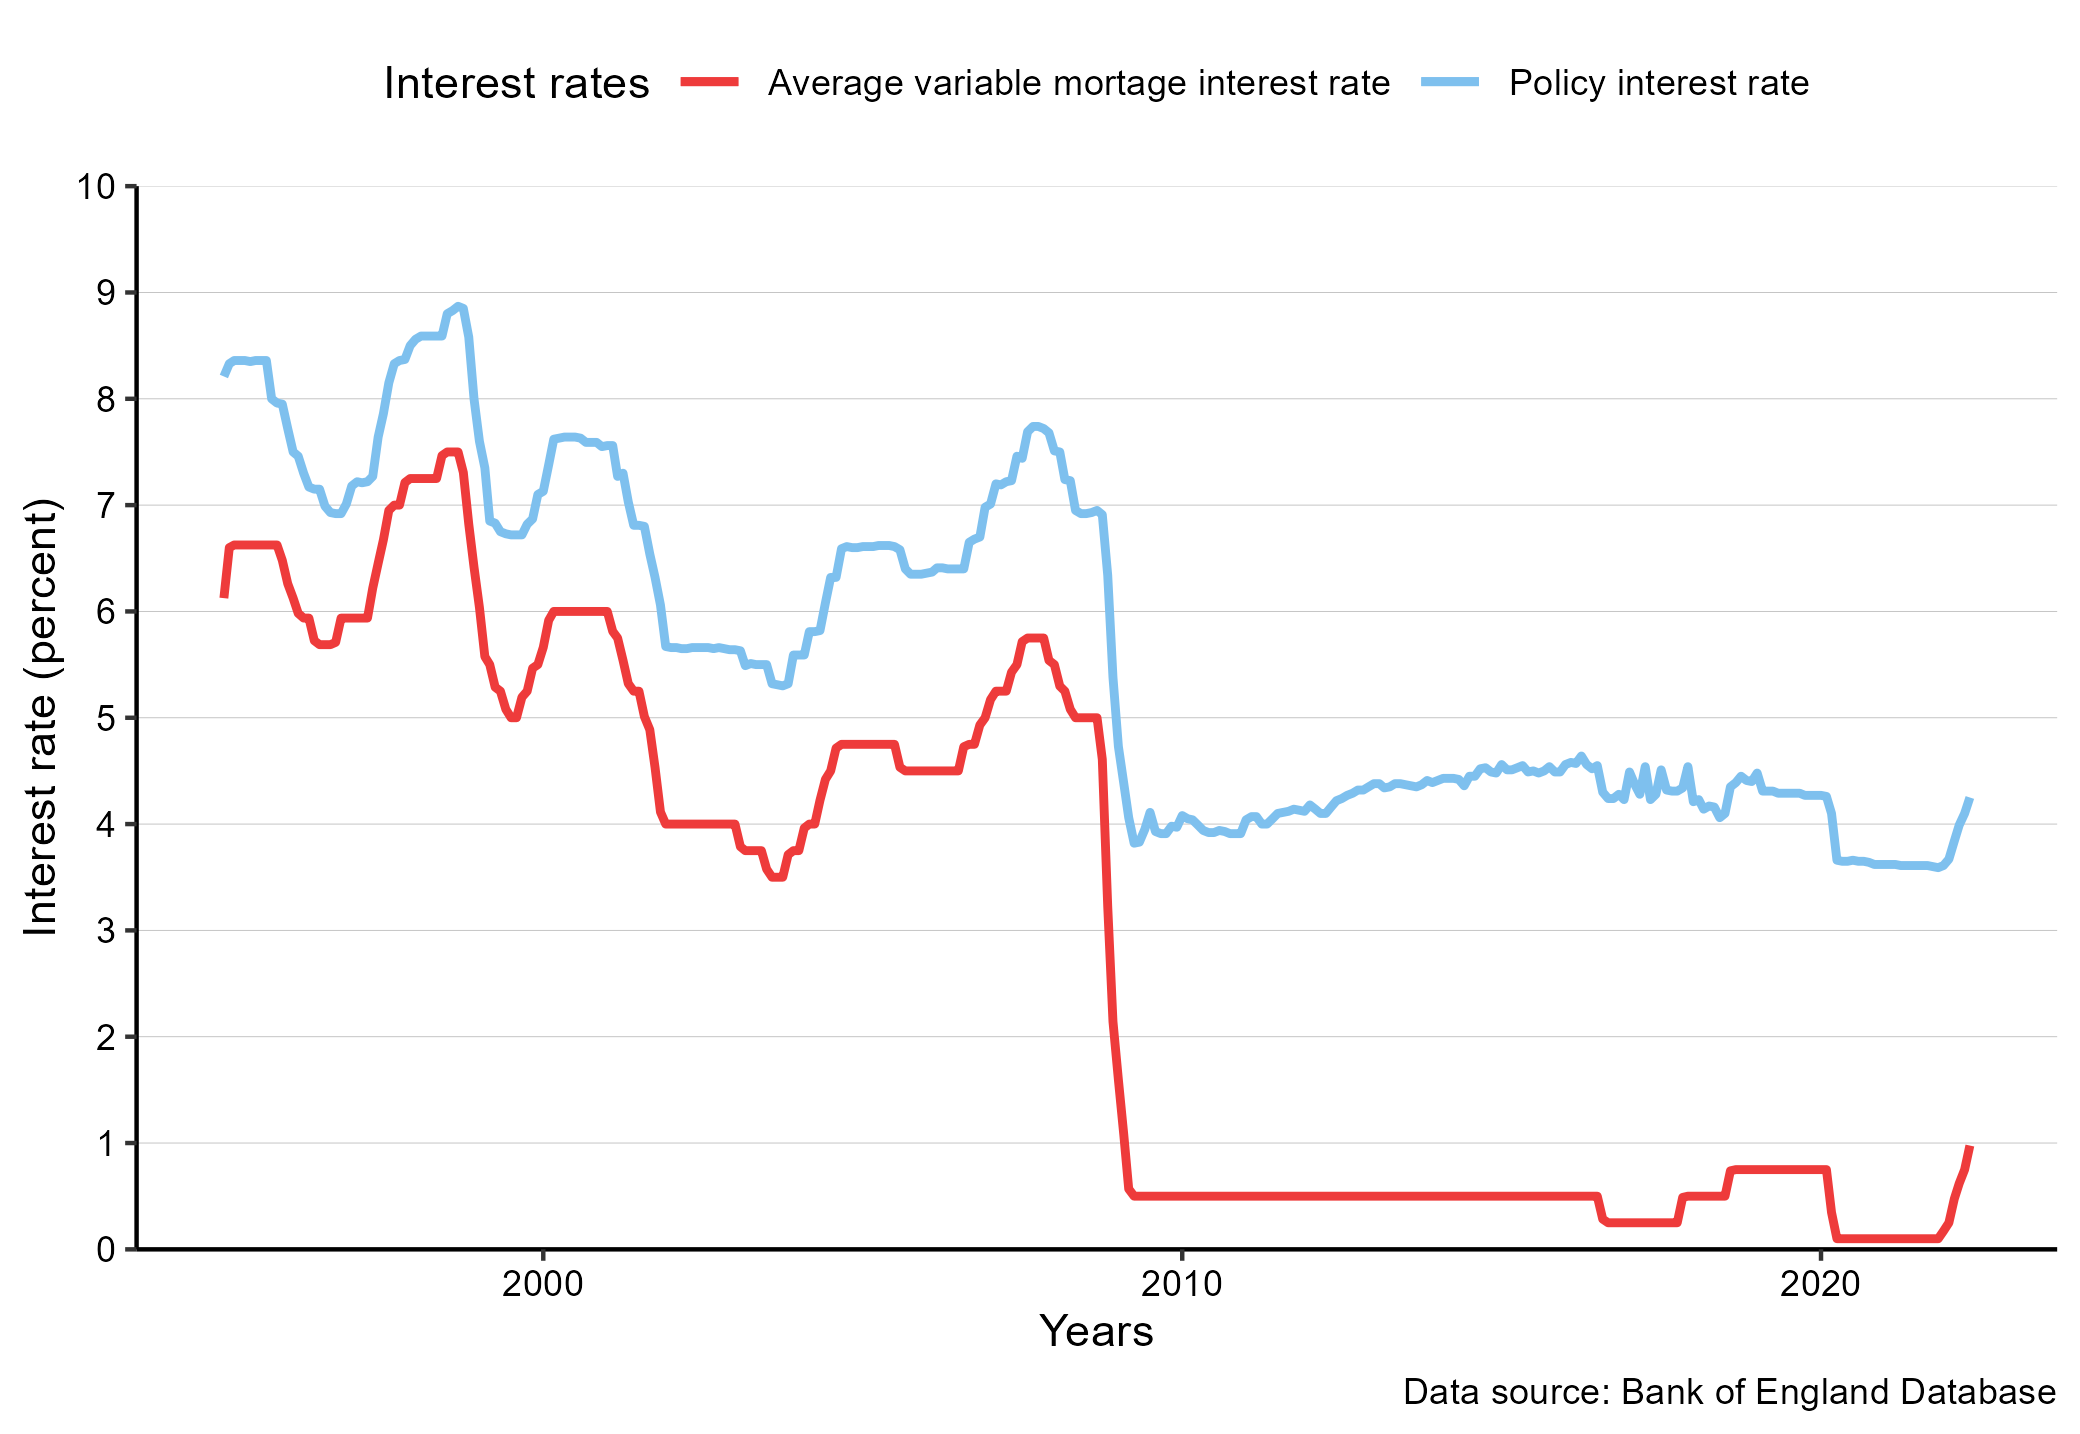 Policy interest rates and bank interest rates for the UK. Source: Bank of England. Series: IUMABEDR and IUMTLMV.